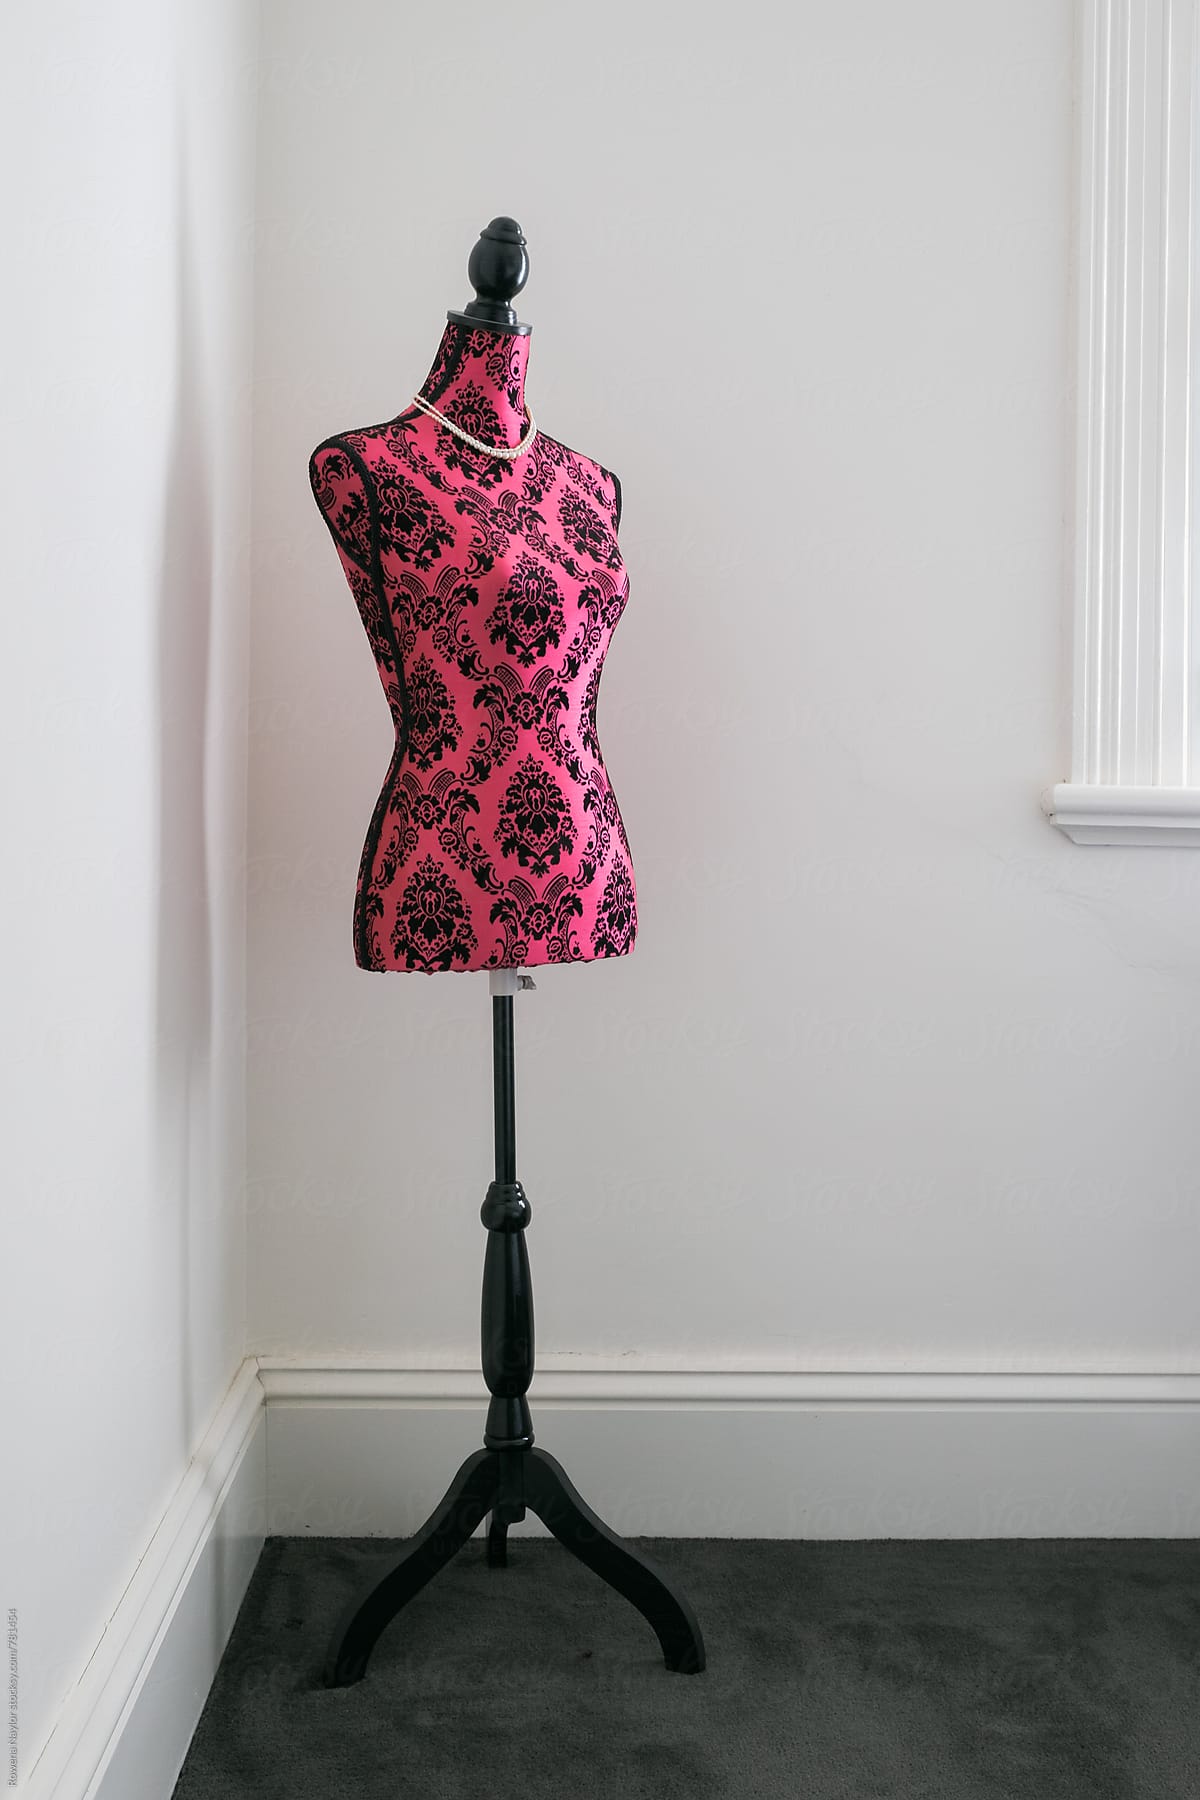 Paisely Mannequin Bodice as home decor